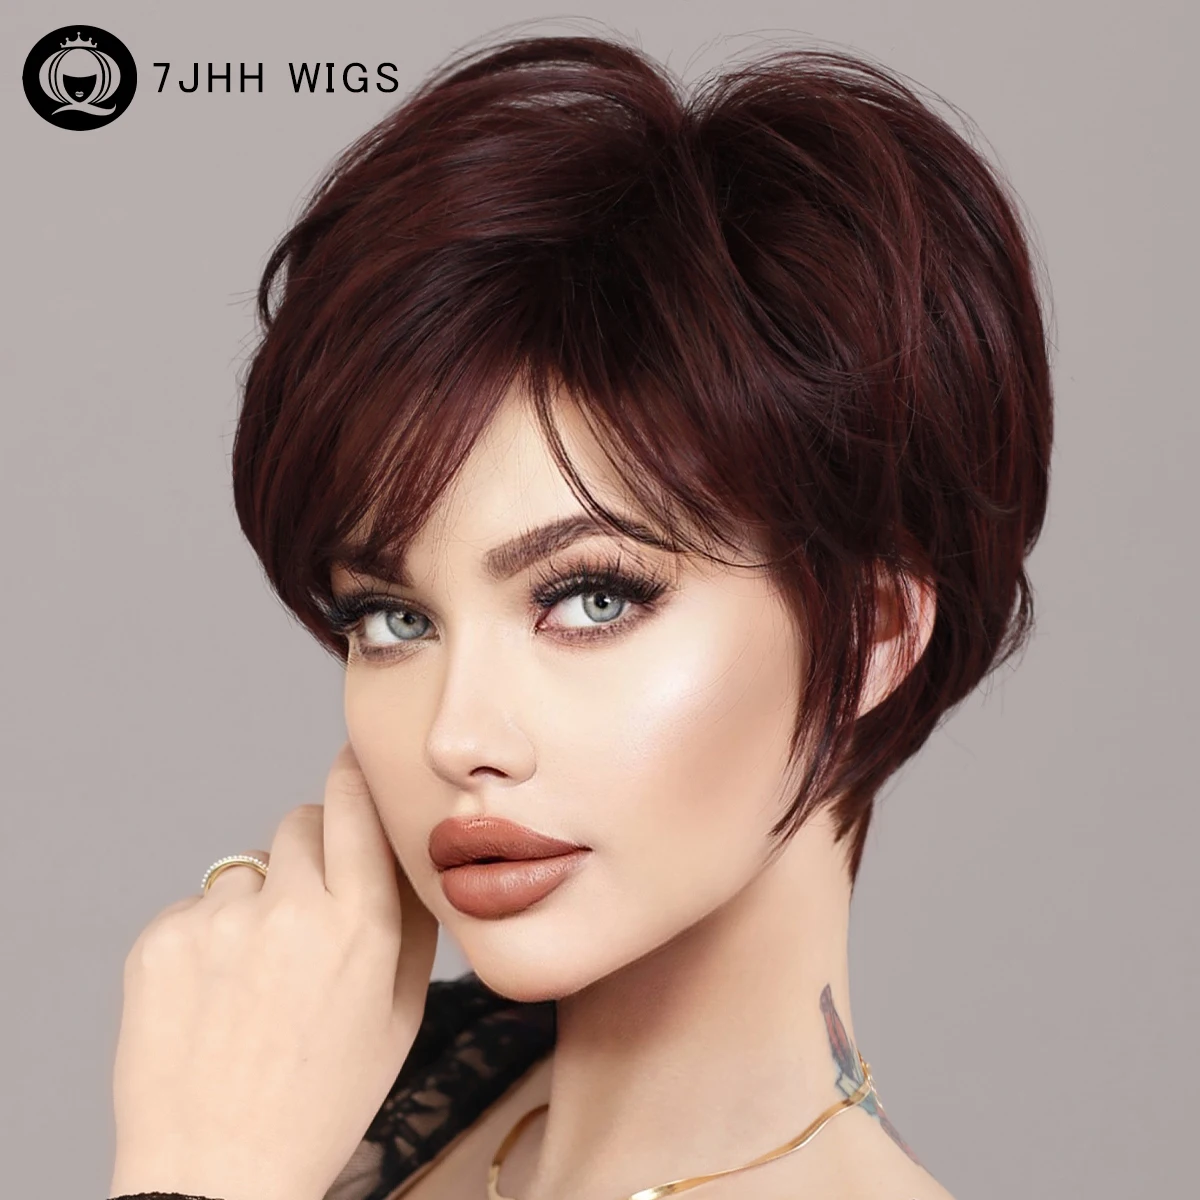 

Pixie Cut Hair Wigs with Bangs Ombre Red Color Wigs Cute Natural Looking Short Black and Burgundy Layered Wavy Wigs for Women